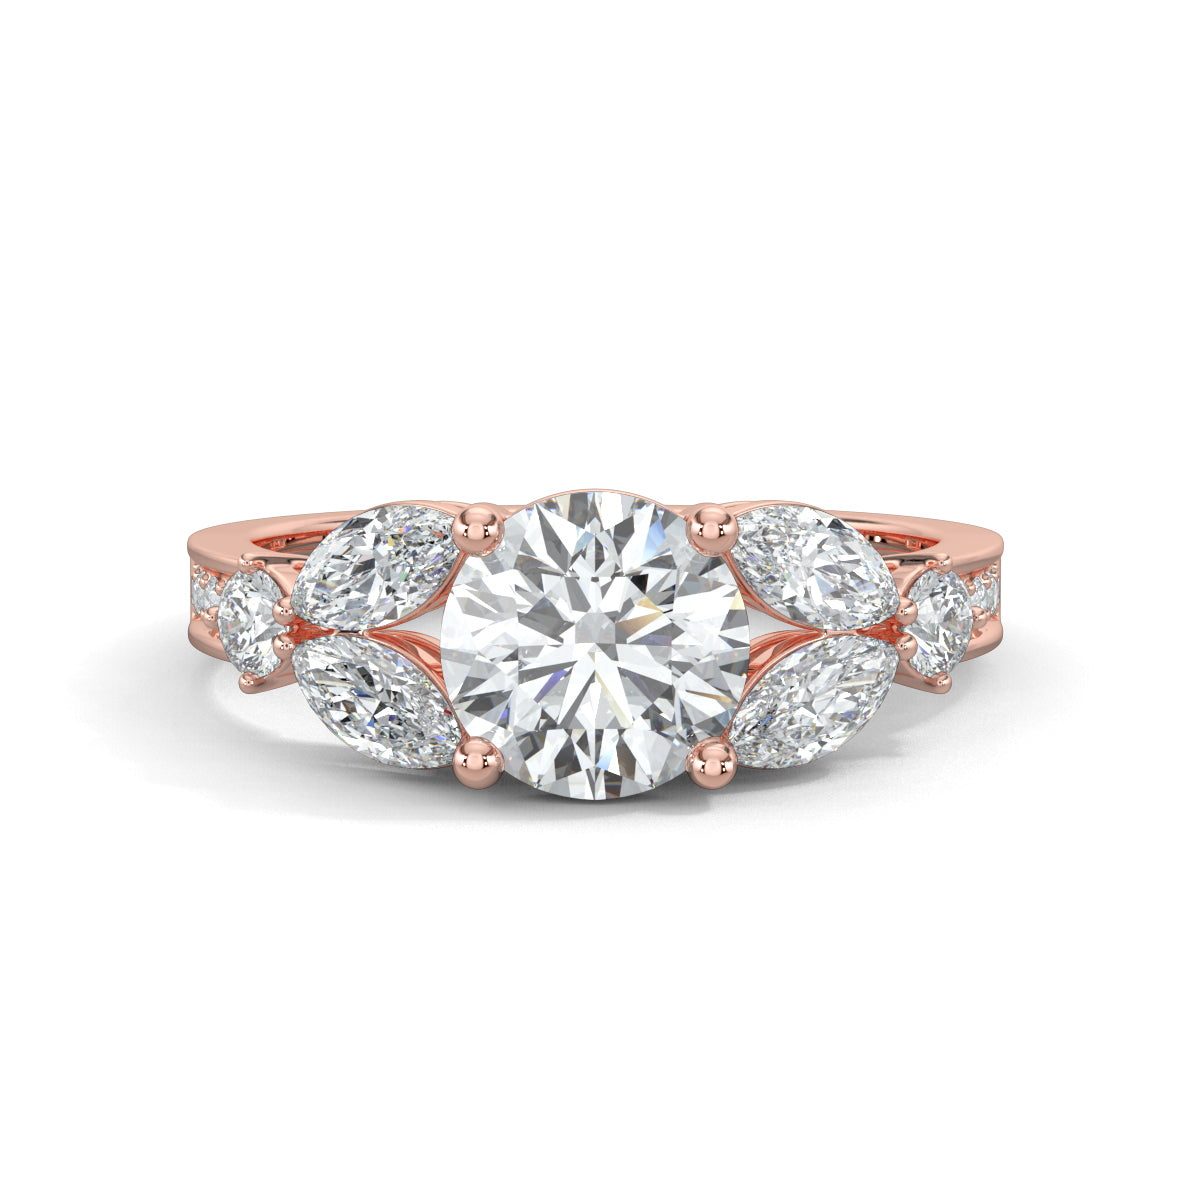 Rose Gold, Diamond Ring, Round solitaire ring, Marquise diamonds, Natural diamonds, Lab-grown diamonds, Pave diamonds, Ethical jewelry, Classic band, Timeless elegance